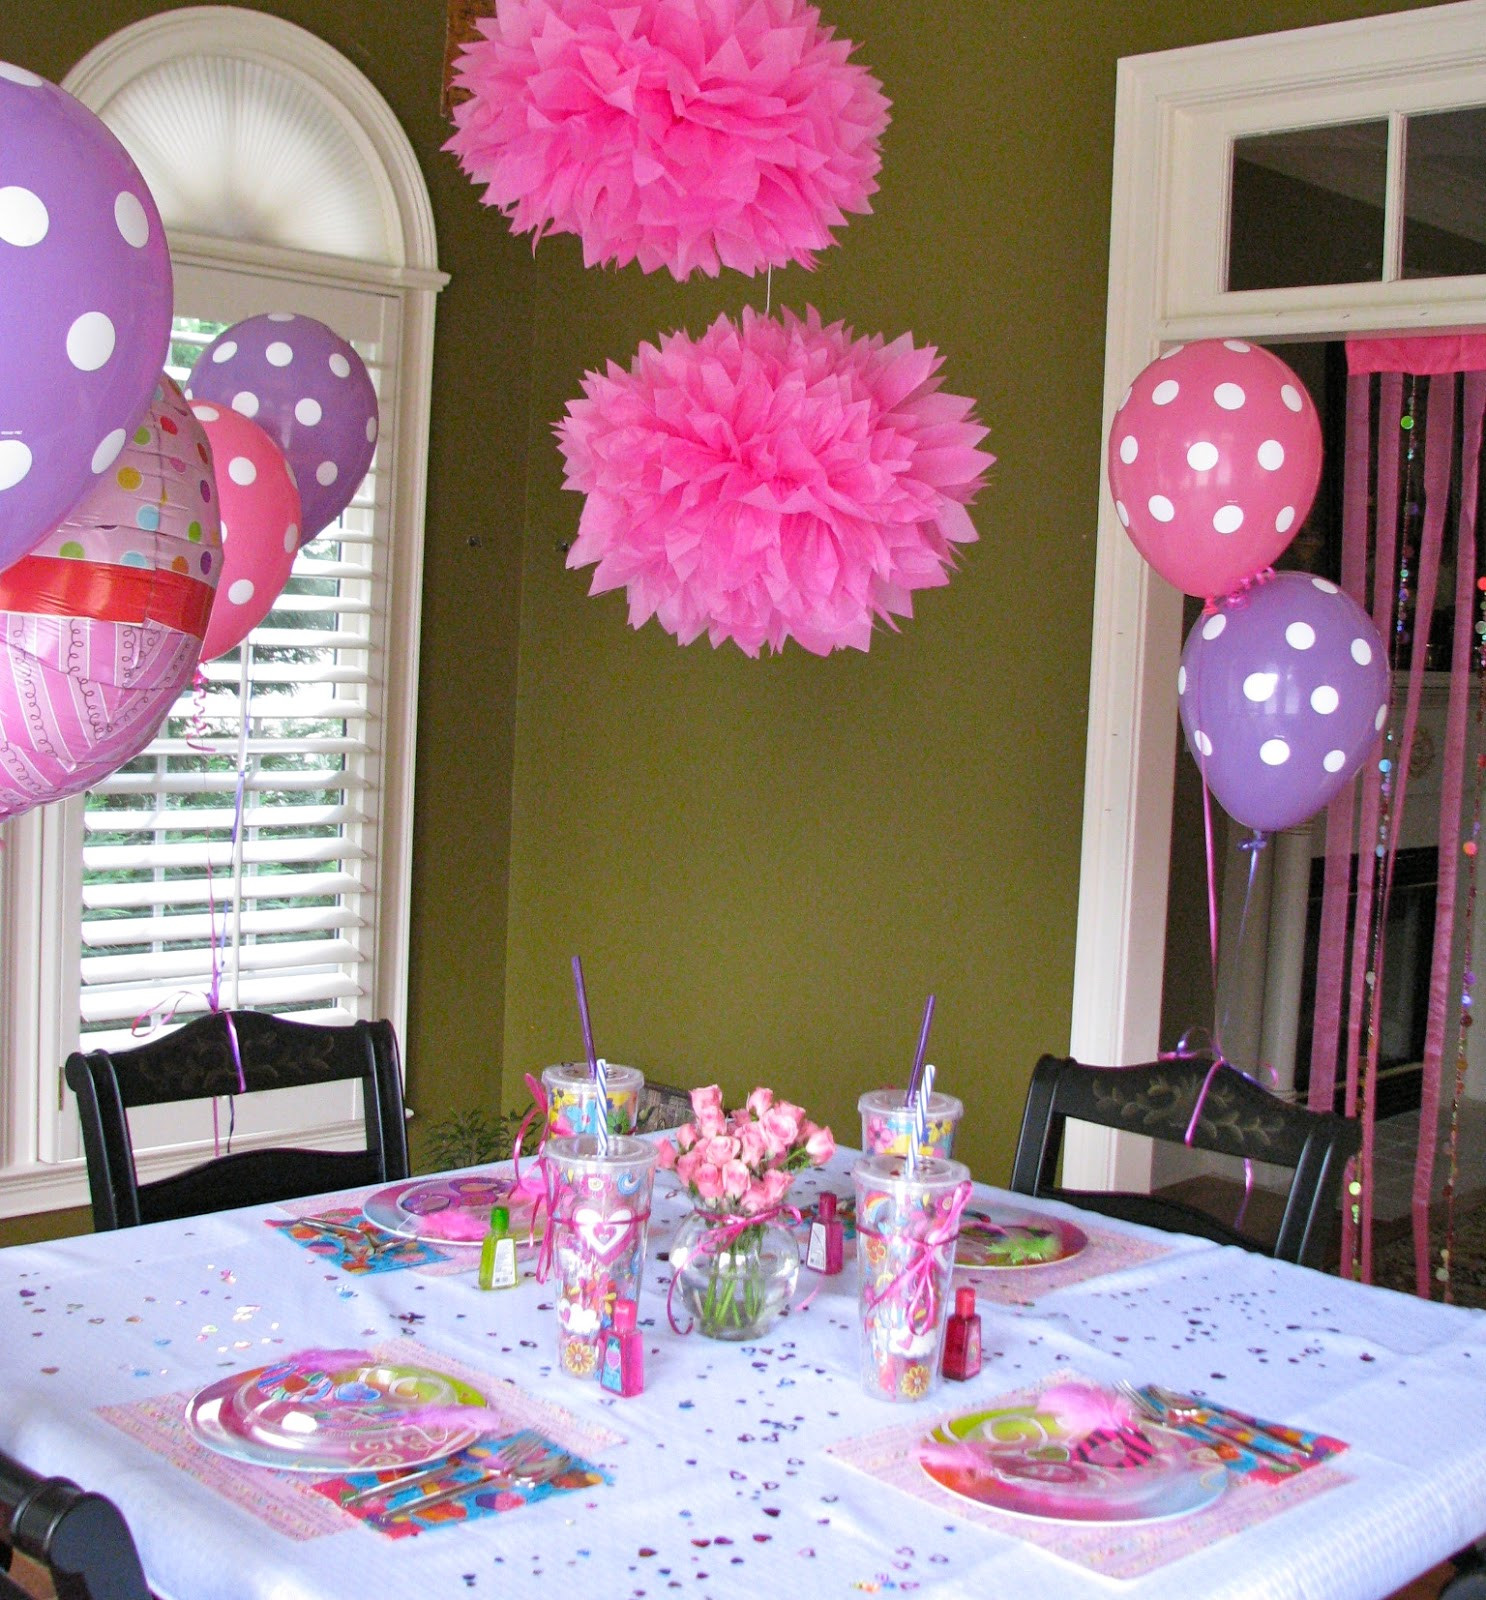 Homemade Birthday Party Decorations
 HomeMadeville Your Place for HomeMade Inspiration Girl s